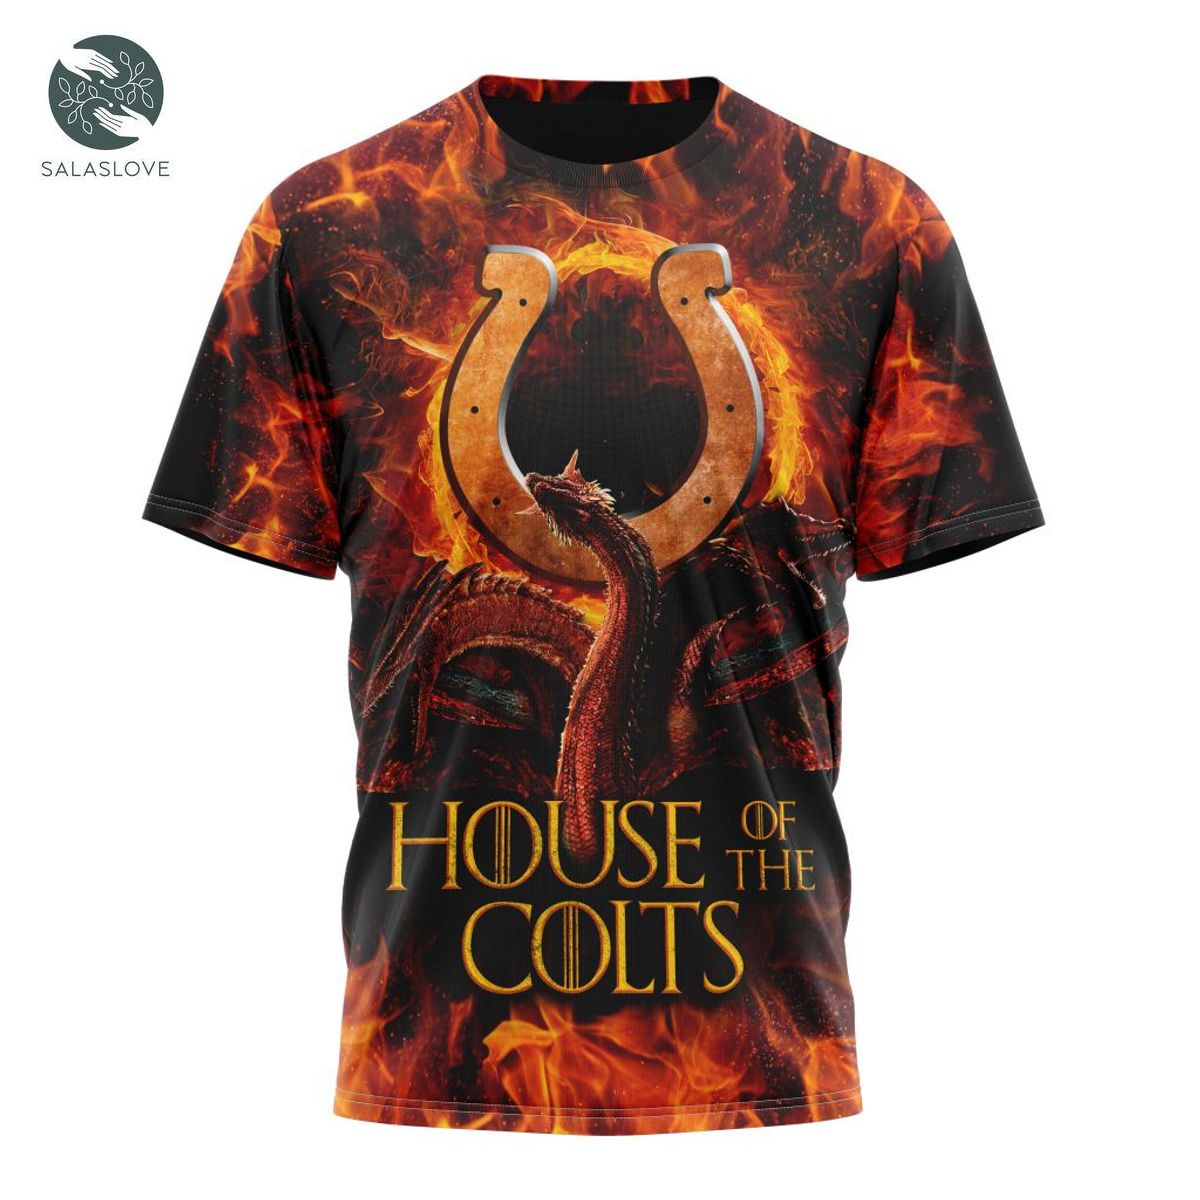 NFL Indianapolis Colts GAME OF THRONES – HOUSE OF THE COLTS Shirt